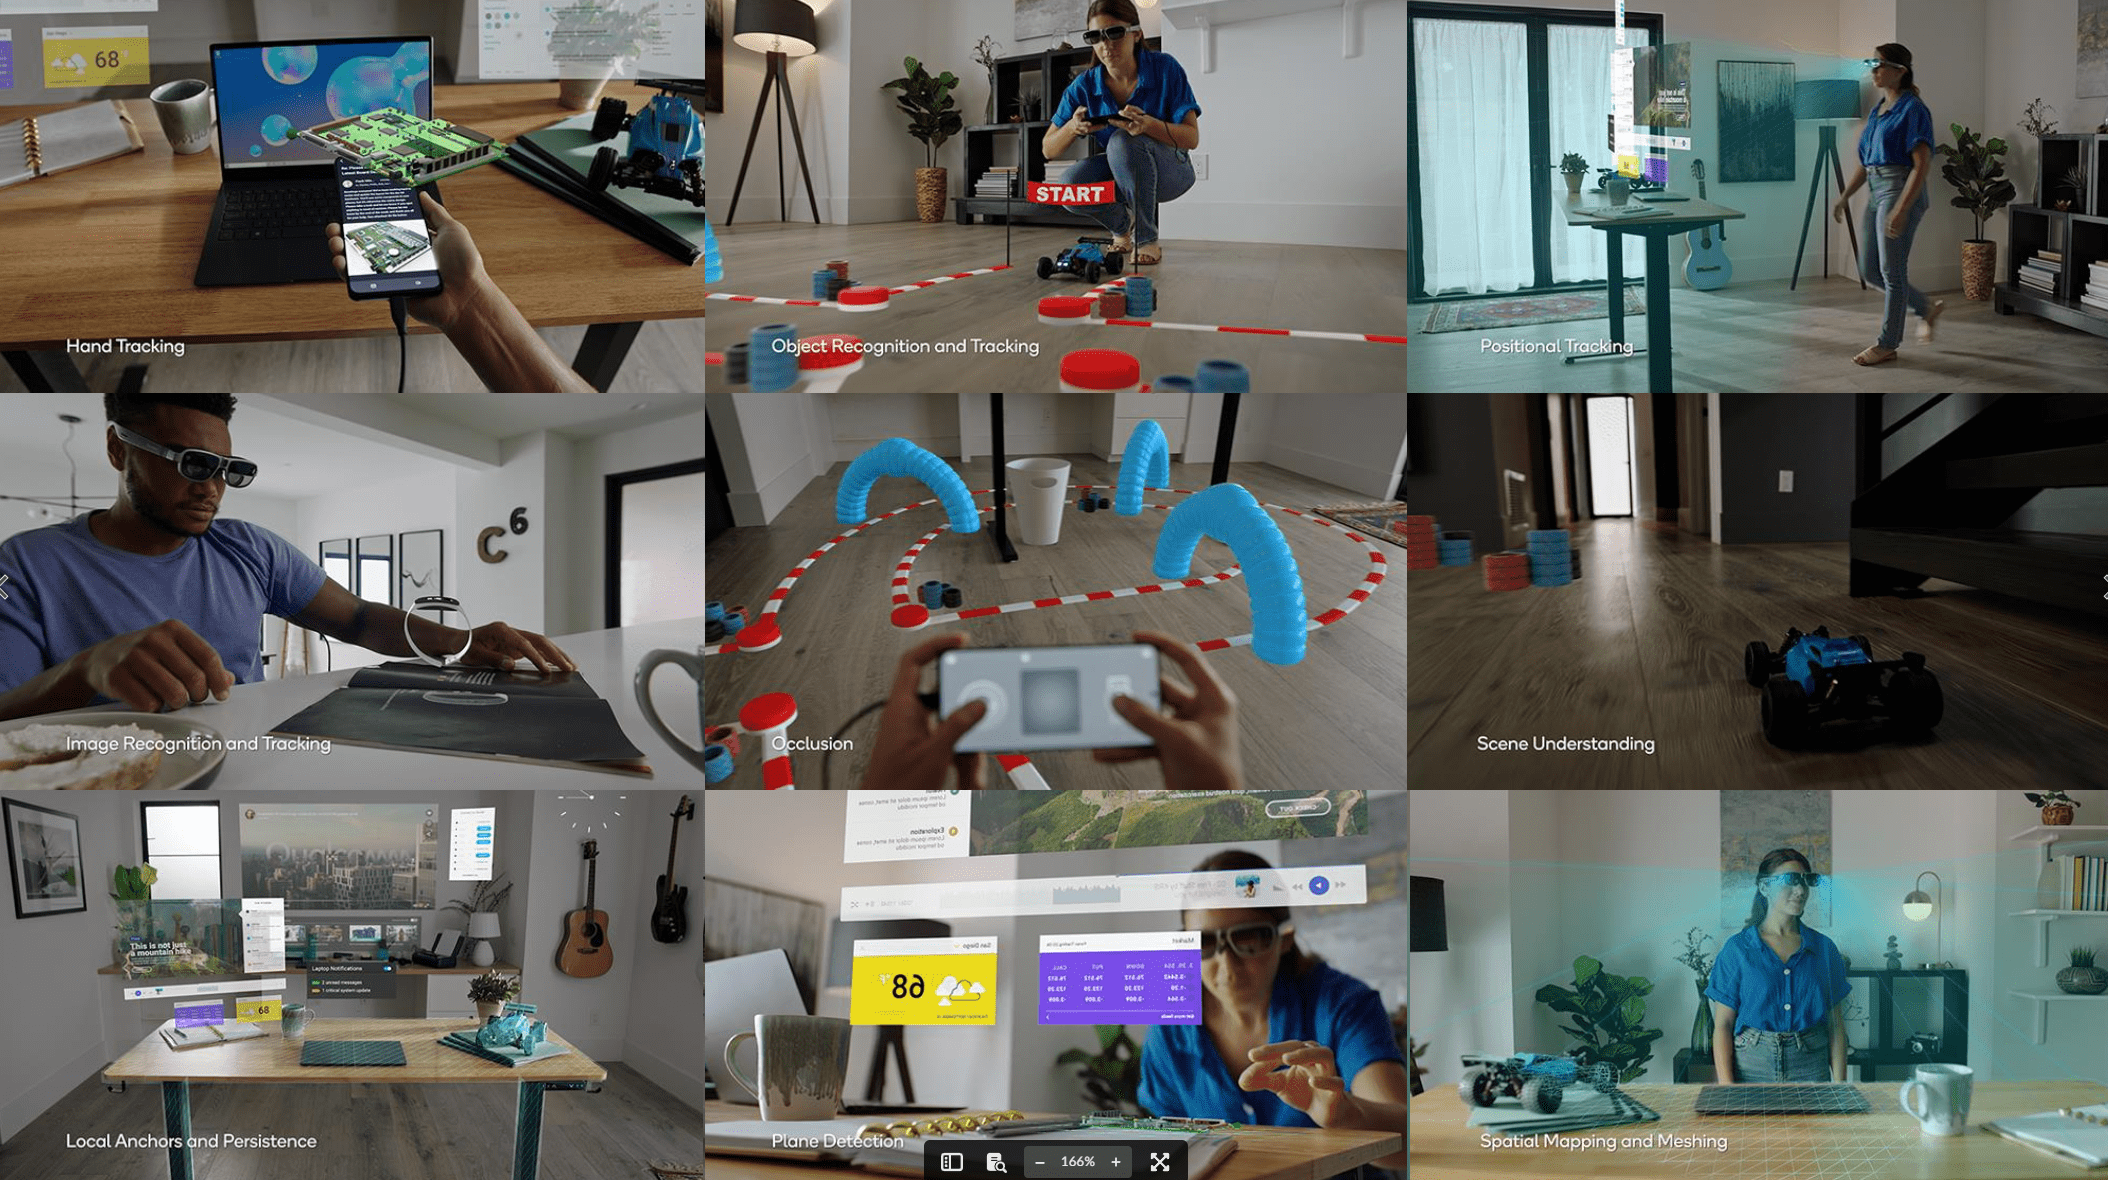 Here are some examples of AR tools available in the Snapdragon Spaces platform. (Image: Qualcomm)